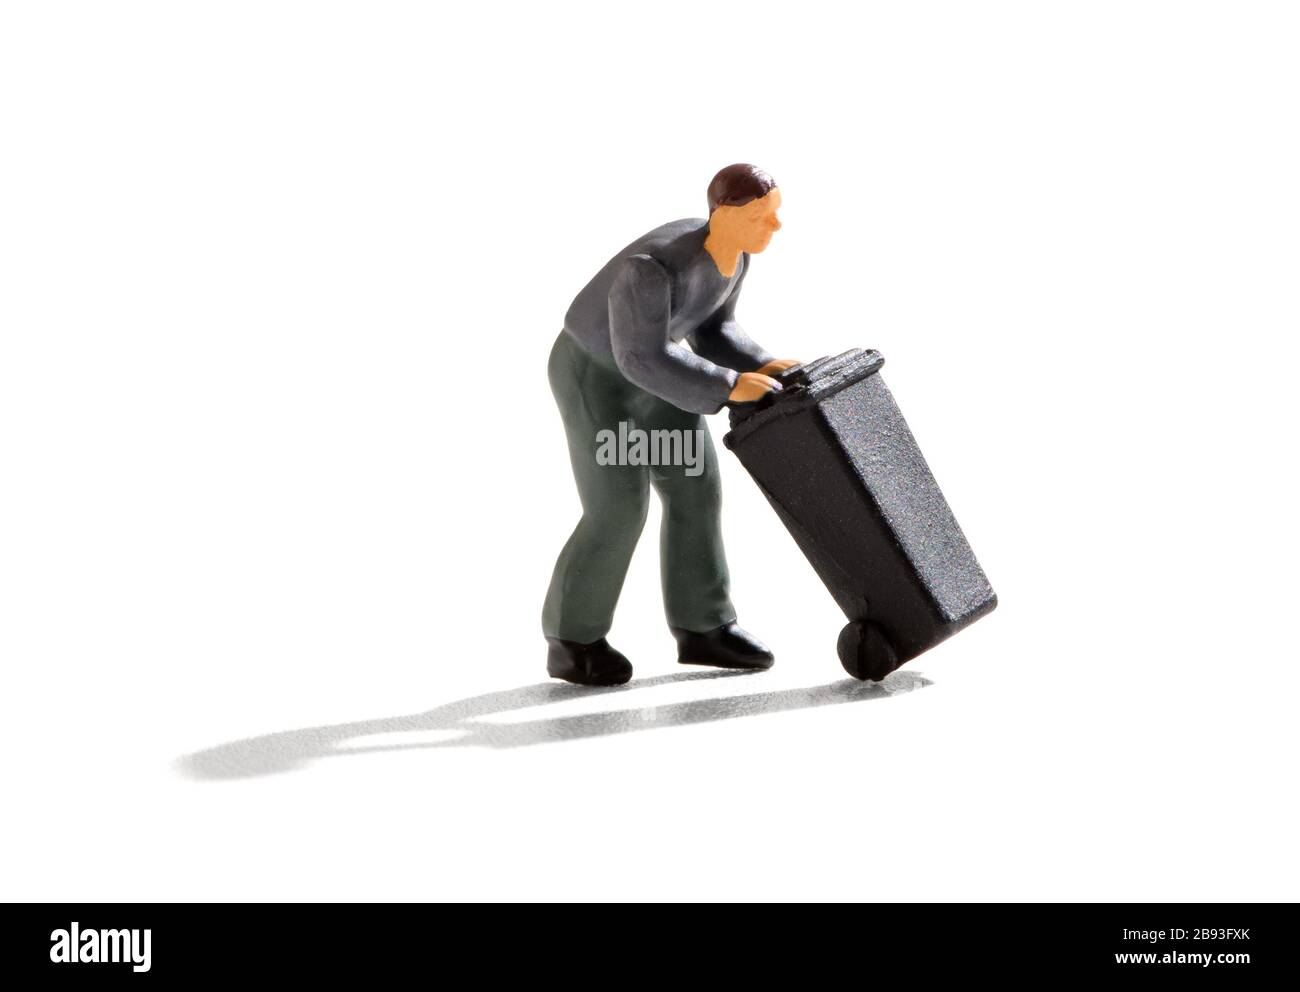 Miniature man bending forwards wheeling a large black plastic garbage bin on a white background with shadow in a waste disposal concept Stock Photo